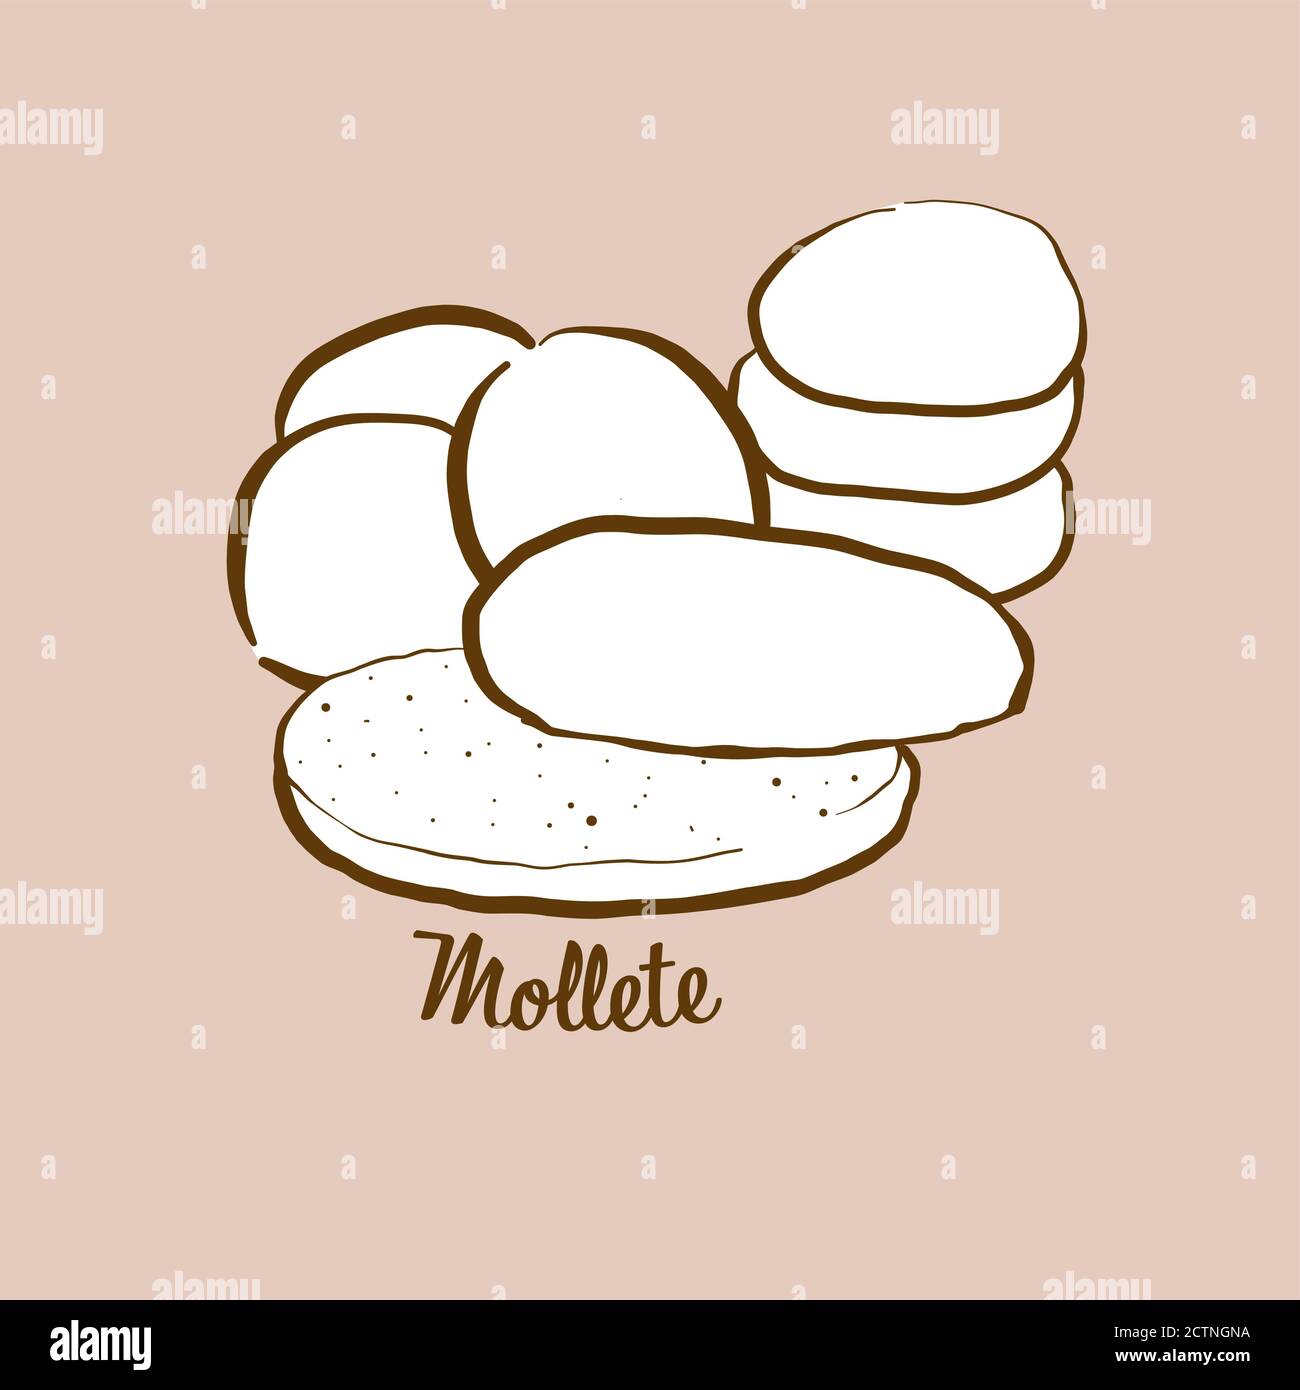 Hand-drawn Mollete bread illustration. Flatbread, White, usually known in Andalusia, Spain. Vector drawing series. Stock Vector